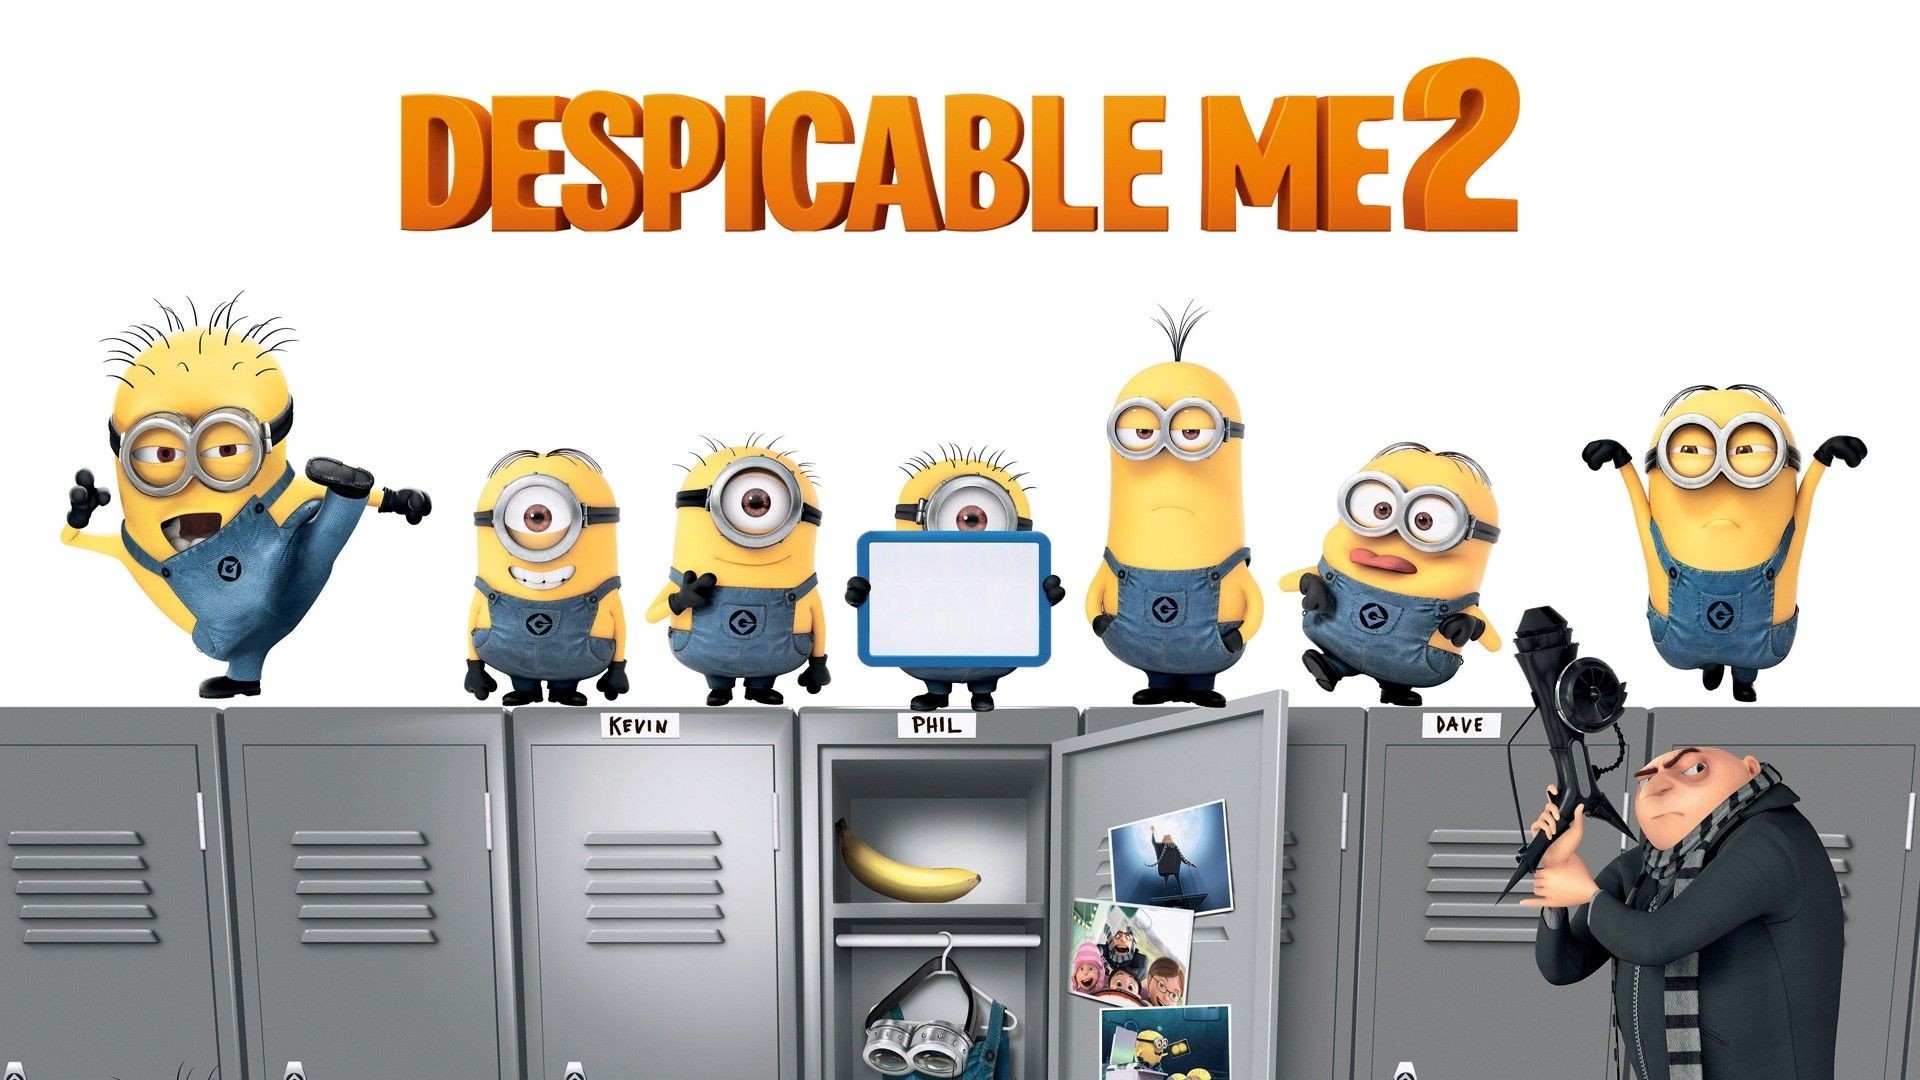 1920x1080 2013 Despicable Me 2 - High Definition Wallpapers - HD wallpapers